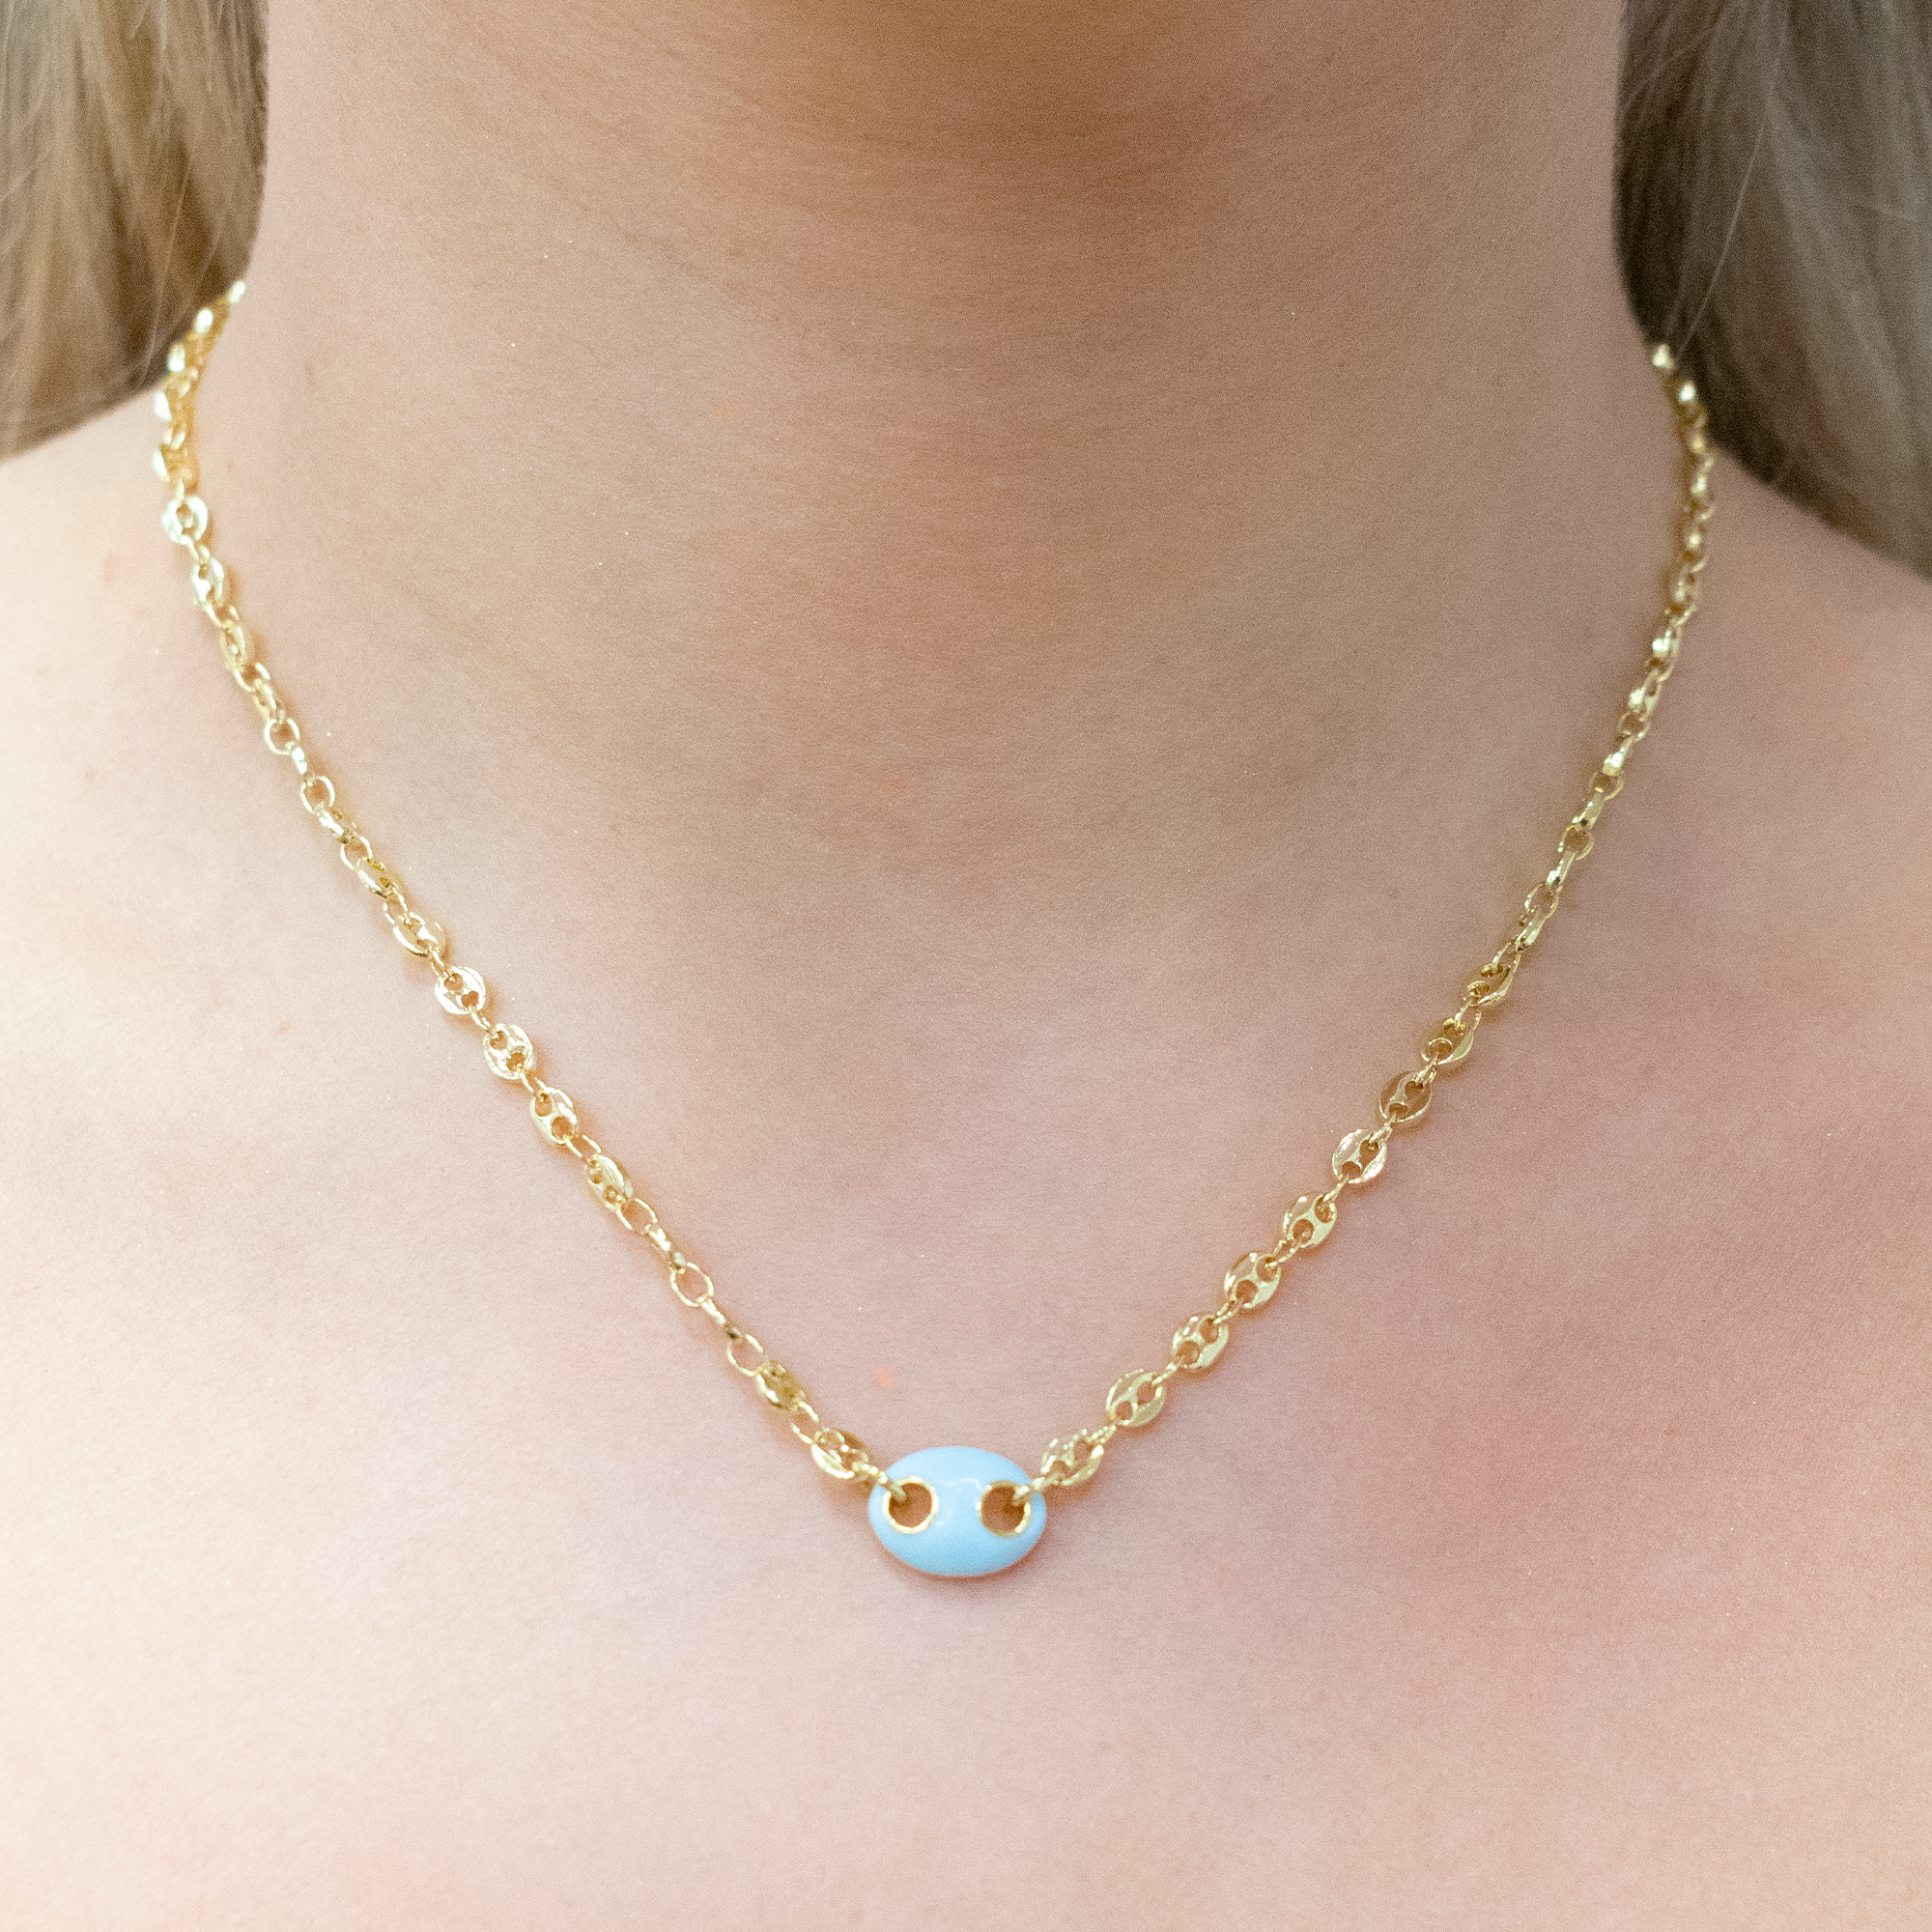 THE LIGHT BLUE ENAMEL MARINER CHAIN NECKLACE